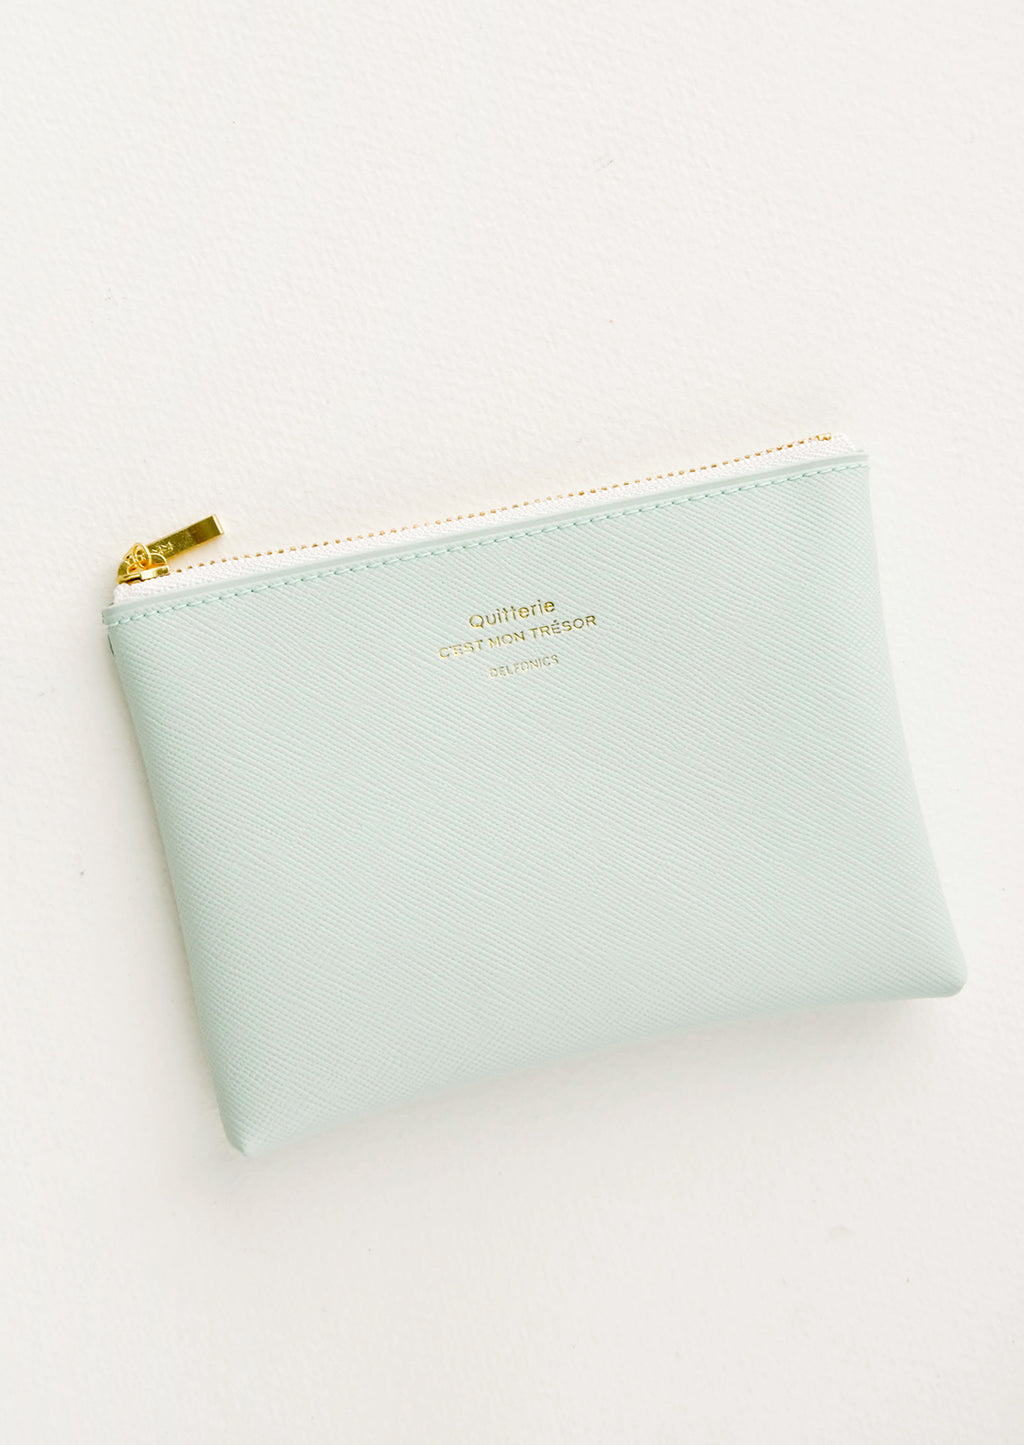 Quitterie Half Zip Wallet – Turquoise – Family of Things